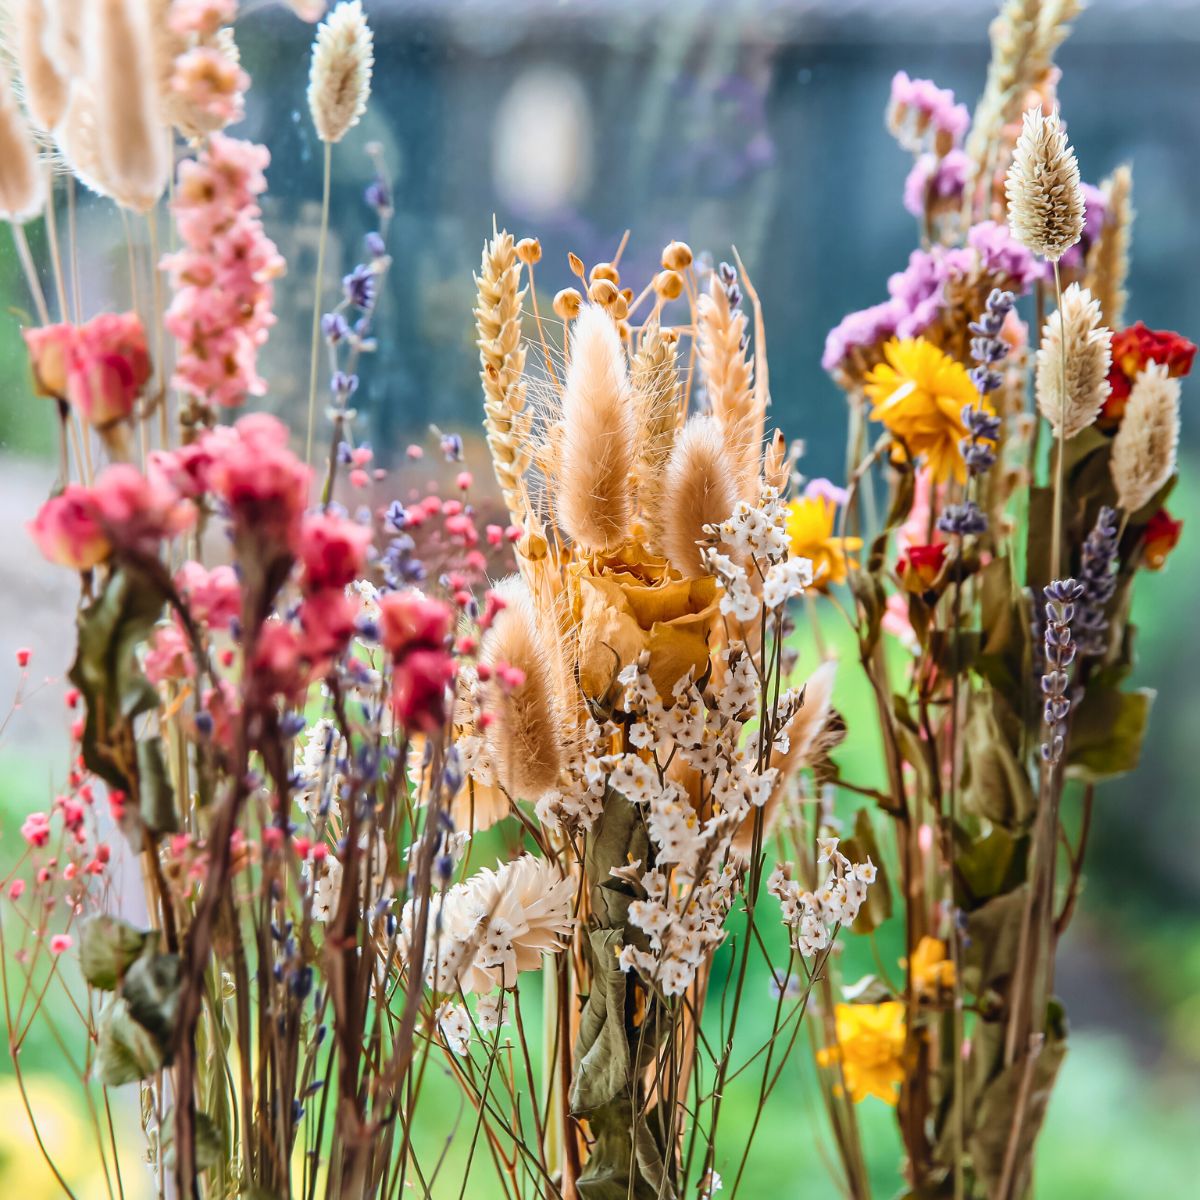 Dutch Flower House Conquers the U.S. Market With Its Sustainable Dried Flower Concepts